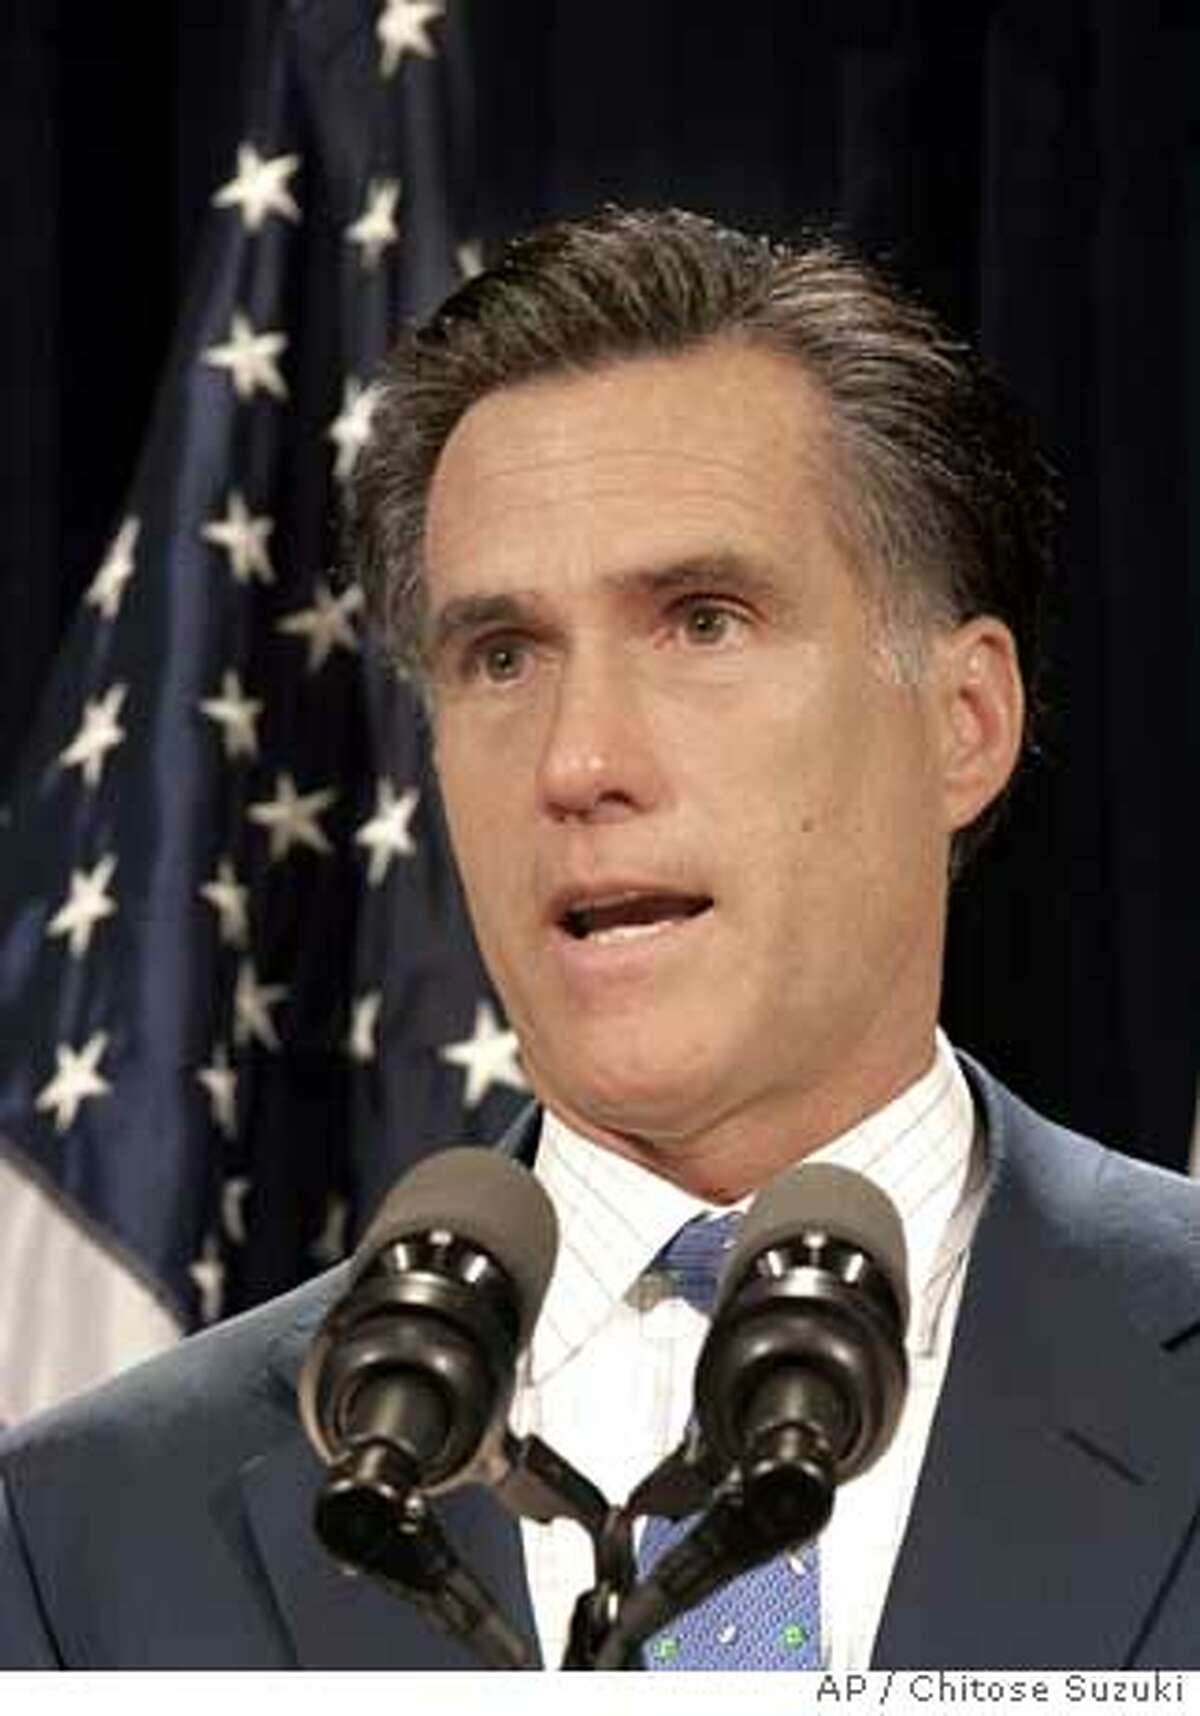 Massachusetts Gov. Mitt Romney speaks during a news conference at the Statehouse in Boston, Thursday, June 16, 2005, concerning on the current constitutional amendment on the definition of marriage. (AP Photo/Chitose Suzuki)